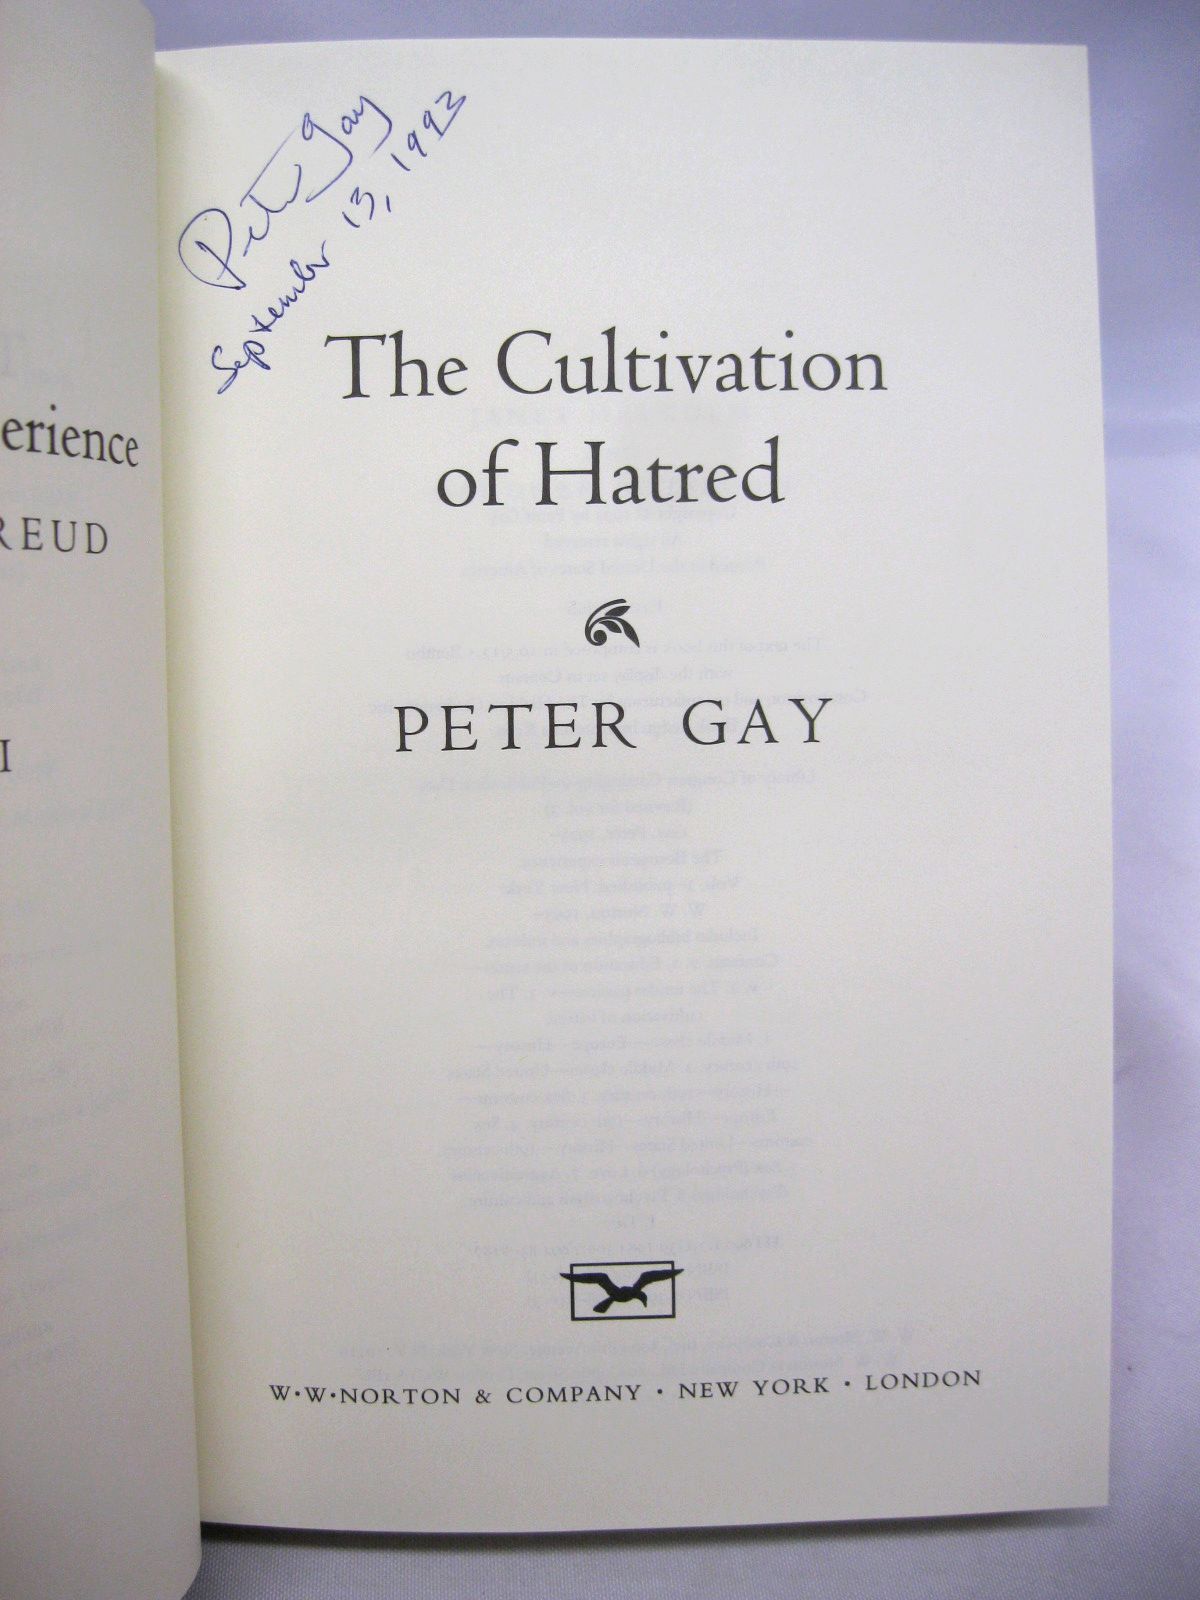 The Cultivation of Hate: The Bourgeouis Experience Victoria to Freud, Volume 2 by Peter Gay